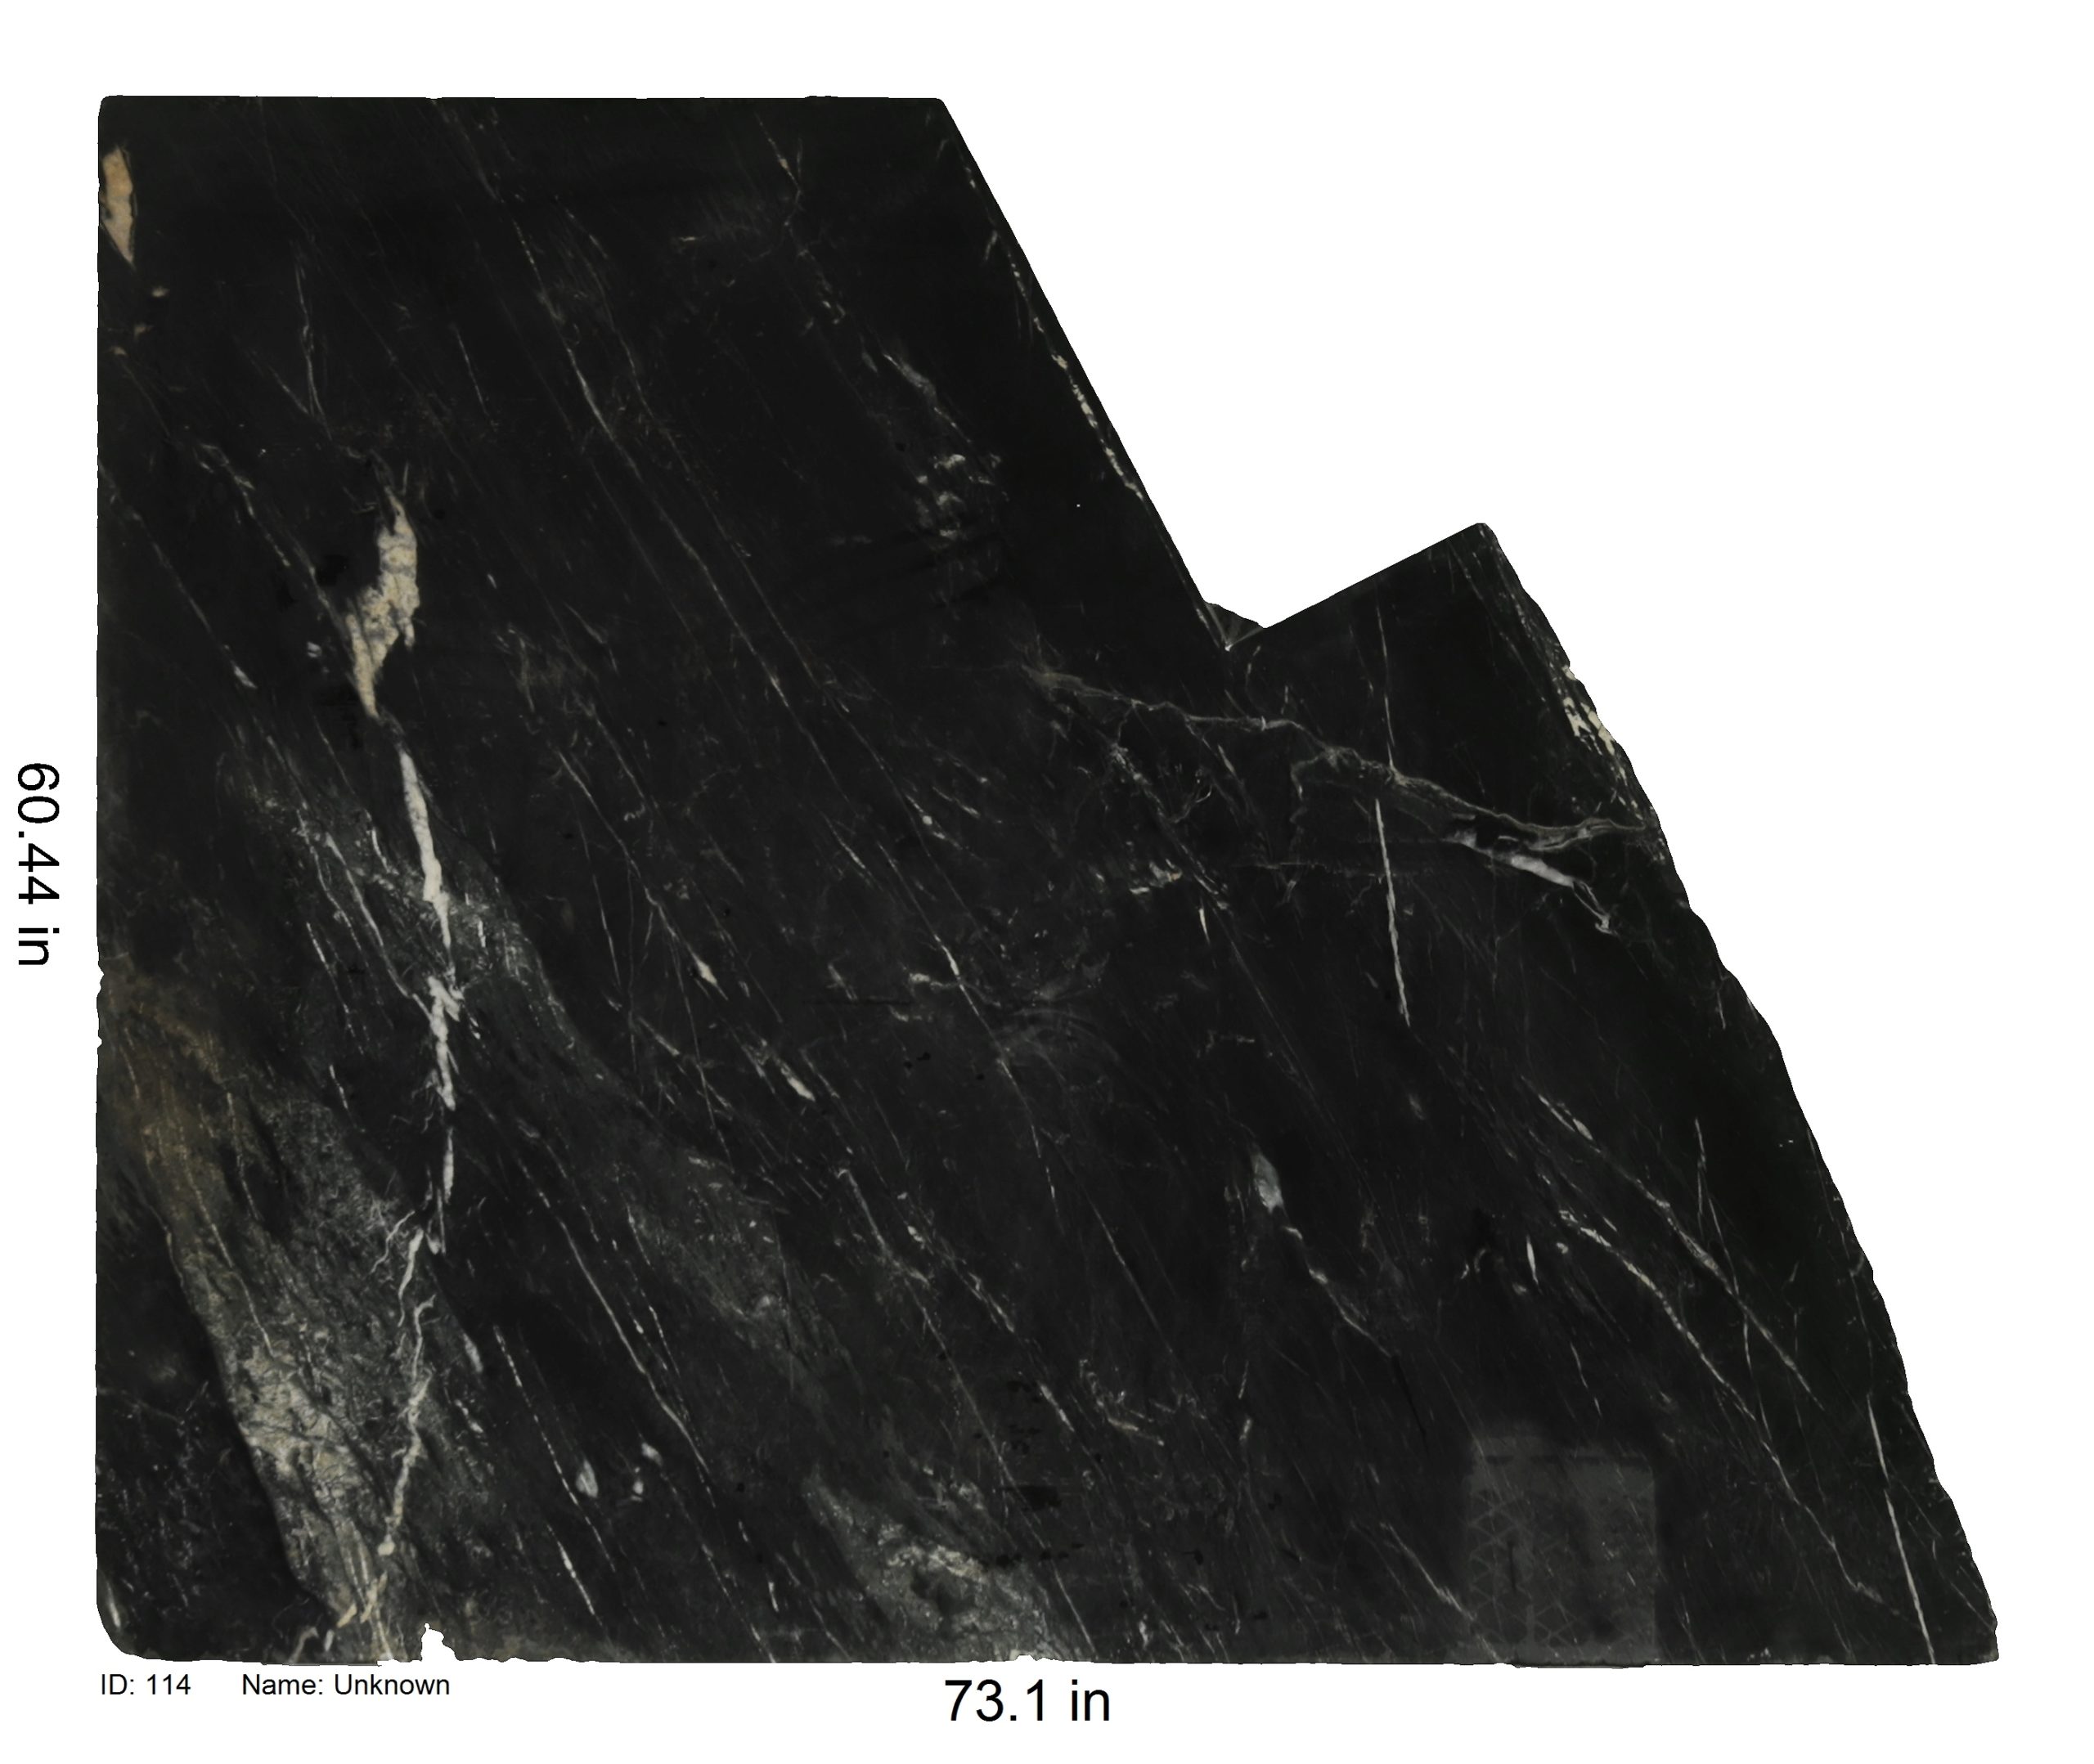 Black Marble With White Veining<br />
ID 114<br />
Name: Unknown<br />
Size60.44x73.1